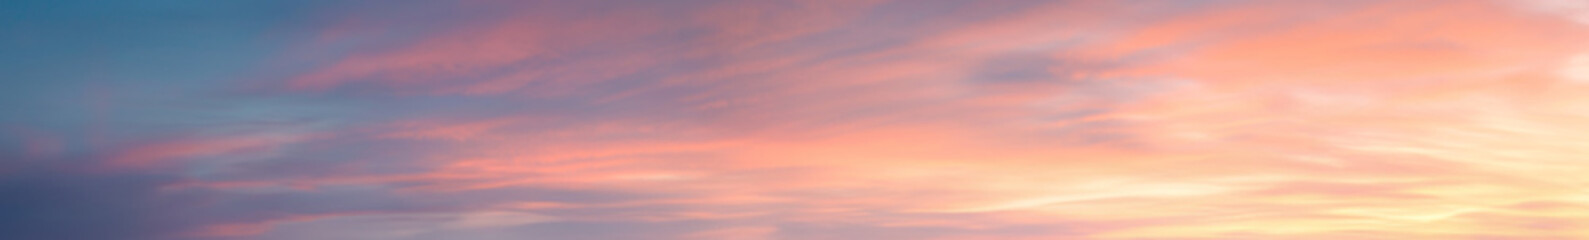 Pastel Vibrant extra wide panoramic sky. Fantasy banner sky. Rich colors. Daytime sunset beauty. Fiery glowing heavenly sky with gradient colors. Red, pink, orange, blue, yellow.